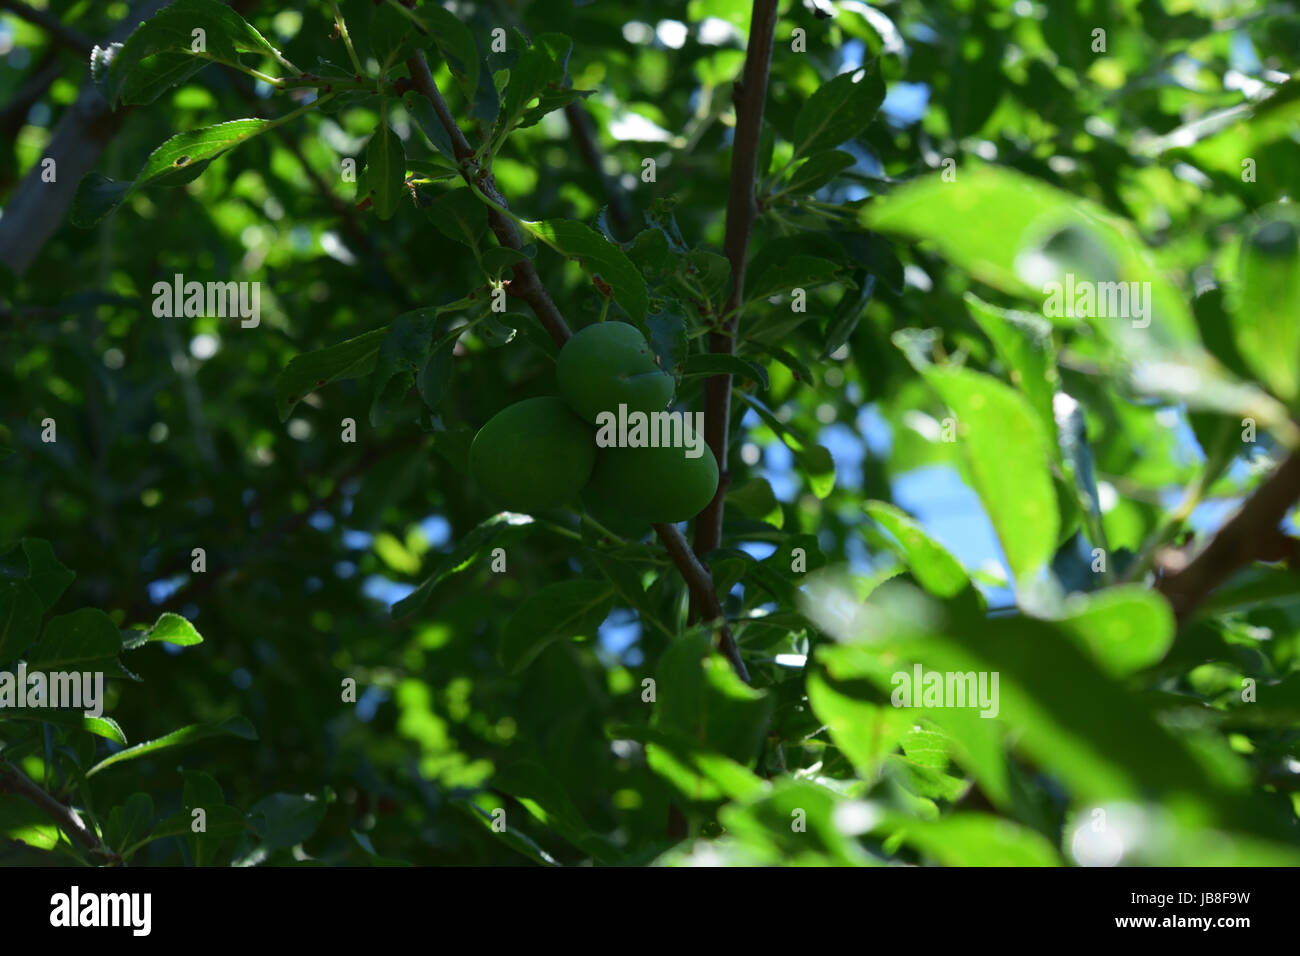 Three unripe plums in the plum tree full of green fresh spring leaves. Blurred blue sky. Stock Photo